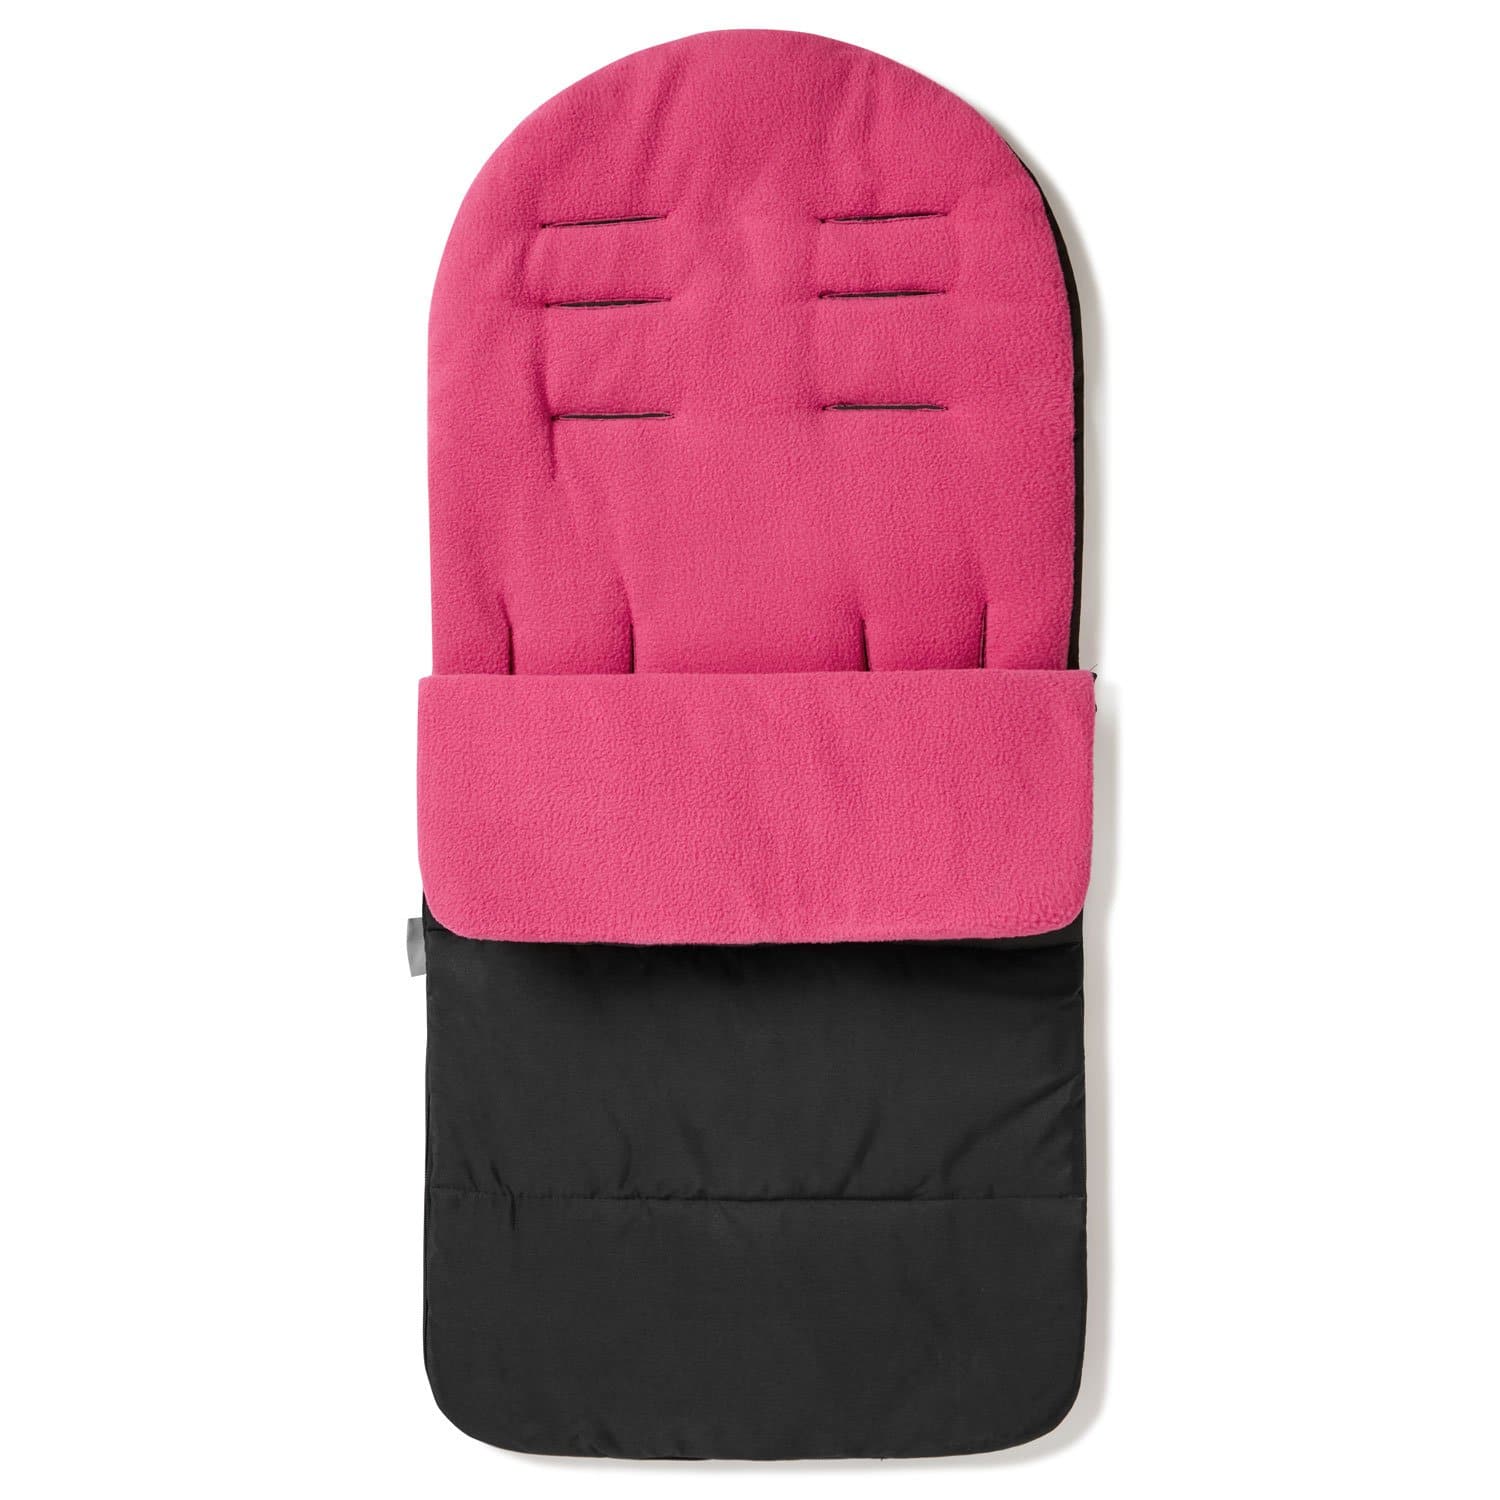 Premium Footmuff / Cosy Toes Compatible with Pericles - Pink Rose / Fits All Models | For Your Little One